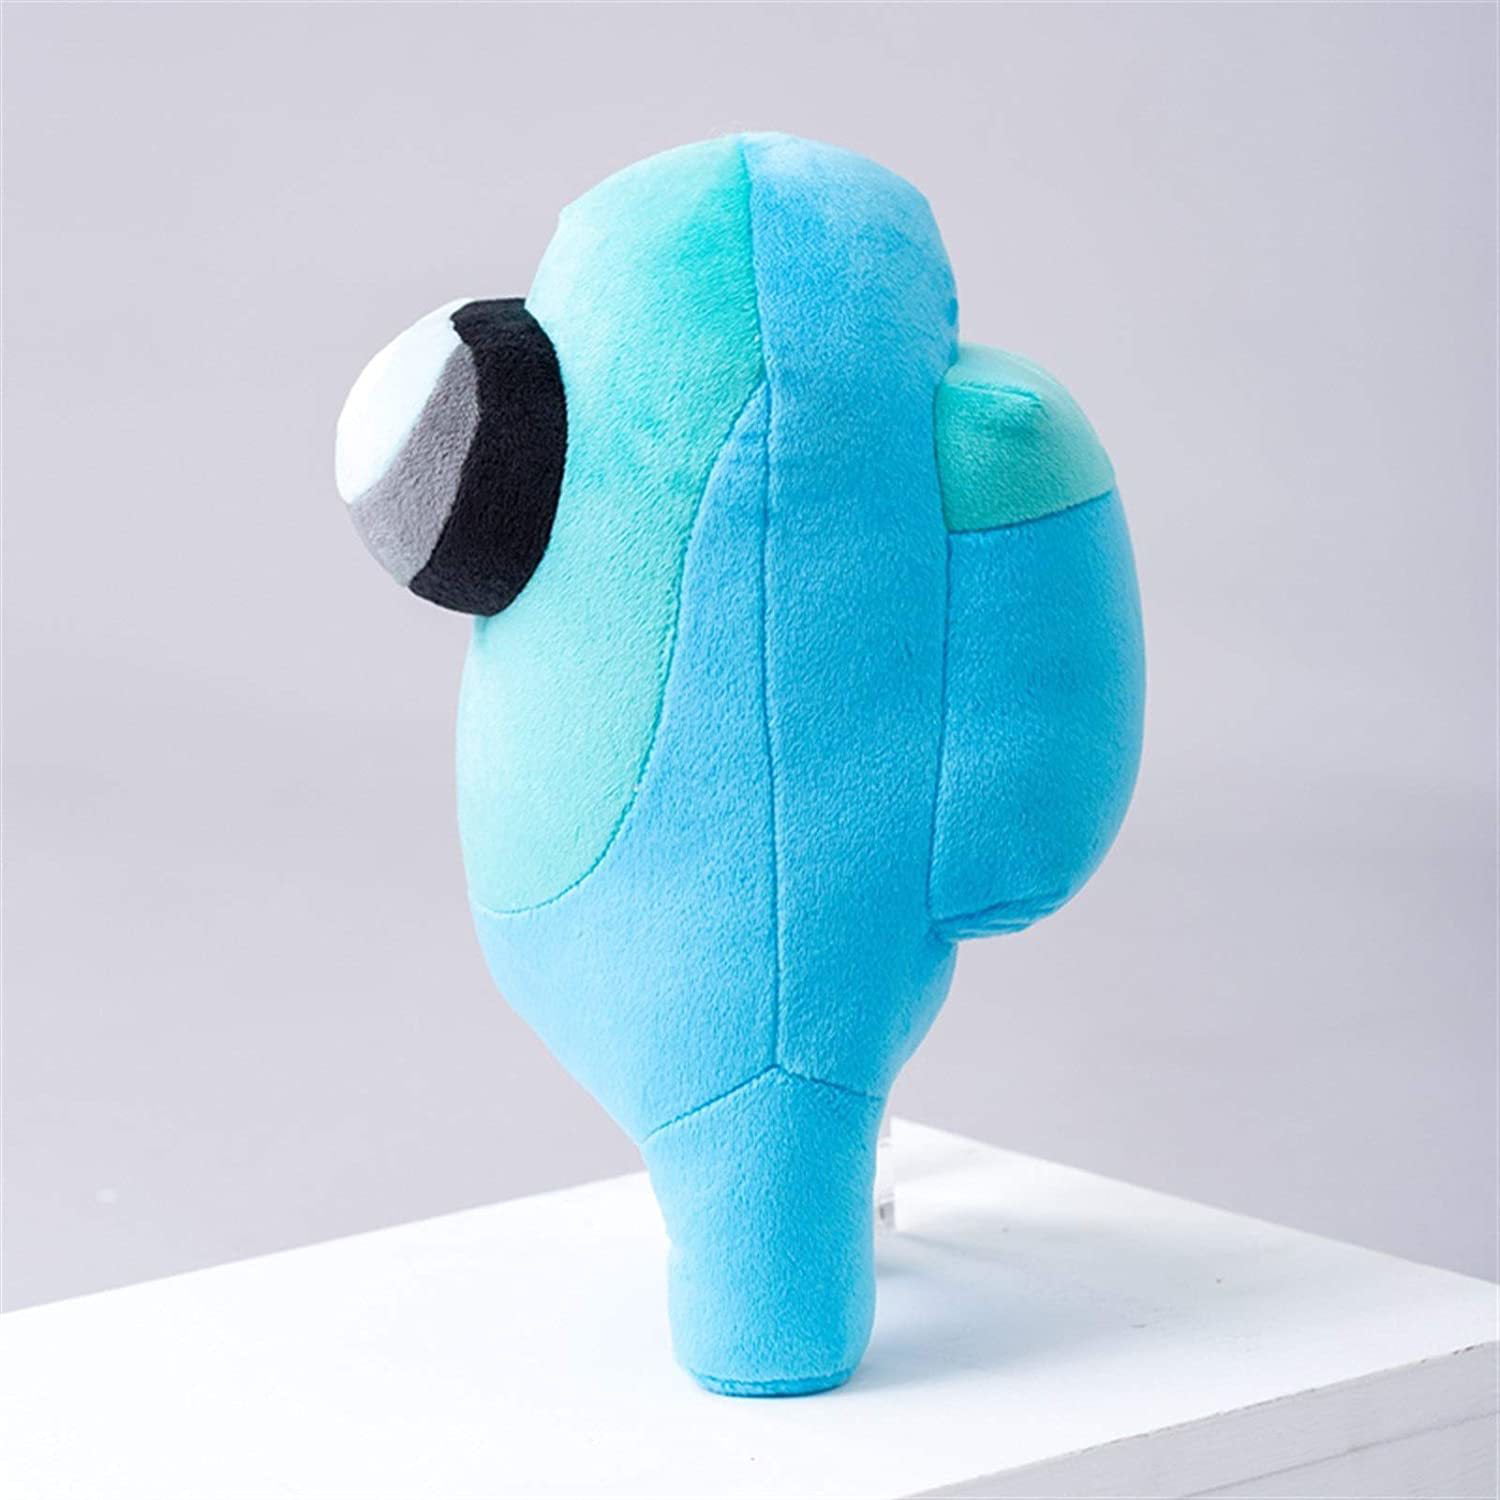 8inch/20cm Among Us Merch Crewmate Stuffed Plush Plushie Toy Action Game Figures Soft Doll for Kids Gift Red